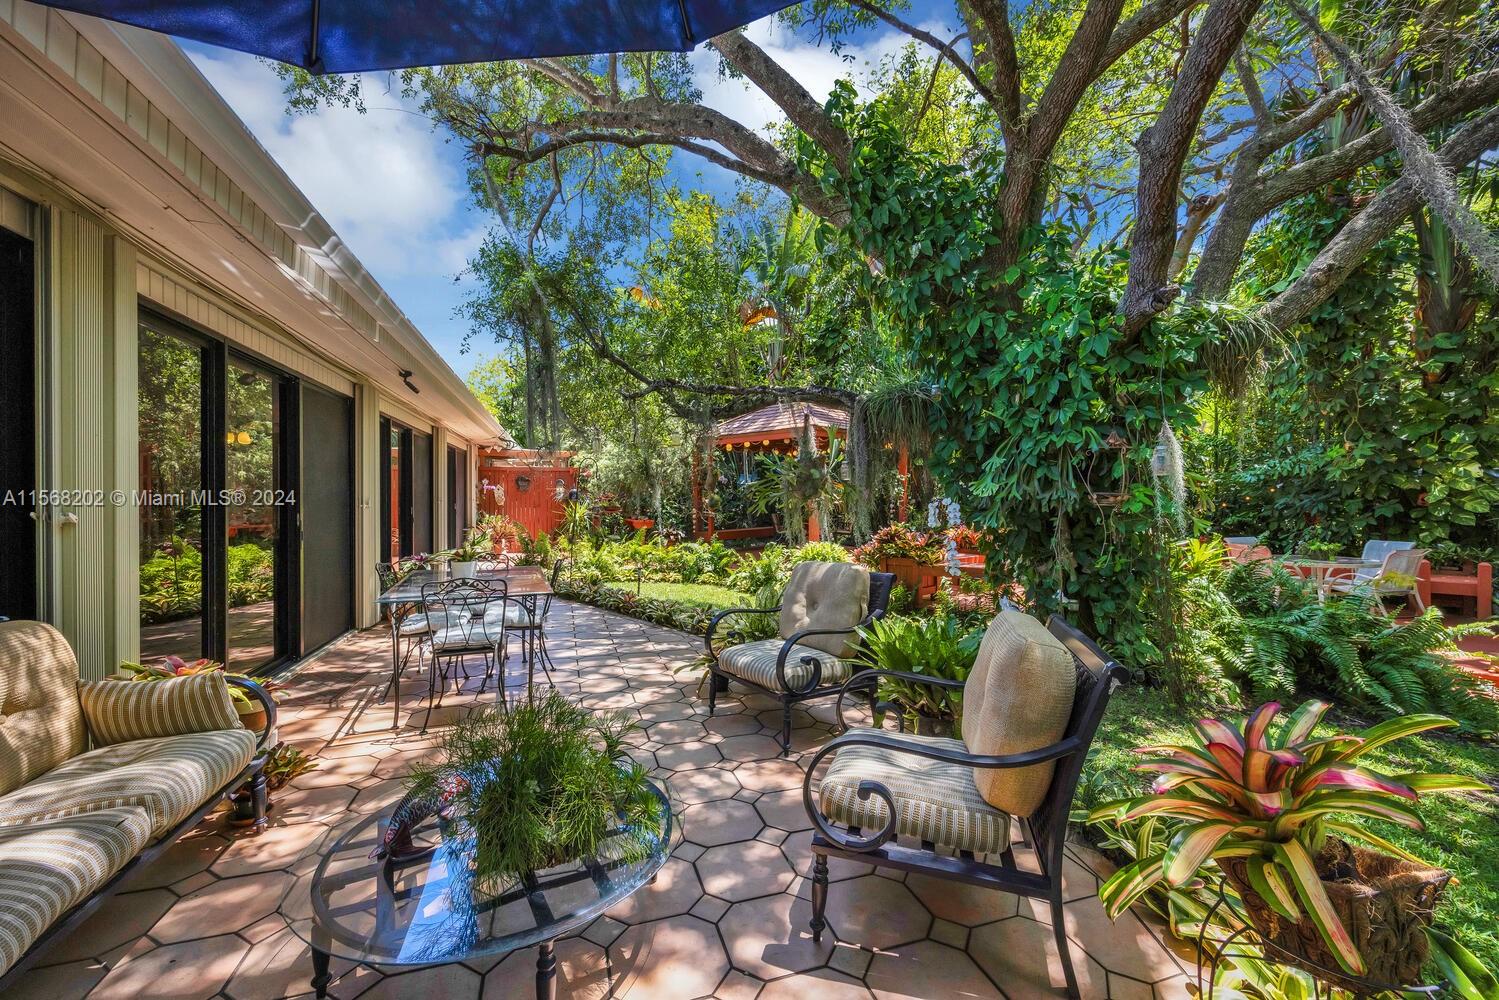 Reminiscent of Fairchild Tropical Garden, this very private oasis will delight & enchant you w/ its vibrant tapestry of colors, textures & beauty. Nestled on almost a half-acre in the prestigious gated community of King’s Bay, this home has been lovingly cared for by the same owner for many decades. The primary suite enjoys its own dedicated wing w/ an attached office/study apart from the secondary bedrms. grouped together on the other side. The lg. Florida rm. extends the living space & offers a bright & airy sanctuary to enjoy the flora & fauna while remaining indoors. A handsome Cook’s Kitchen & large dining rm. are perfect for entertaining along w/ the cozy breakfast nook. Full house generator, impact windows, accordion & Rolladen shutters, 1.5-car garage, storage shed & no flood zone!